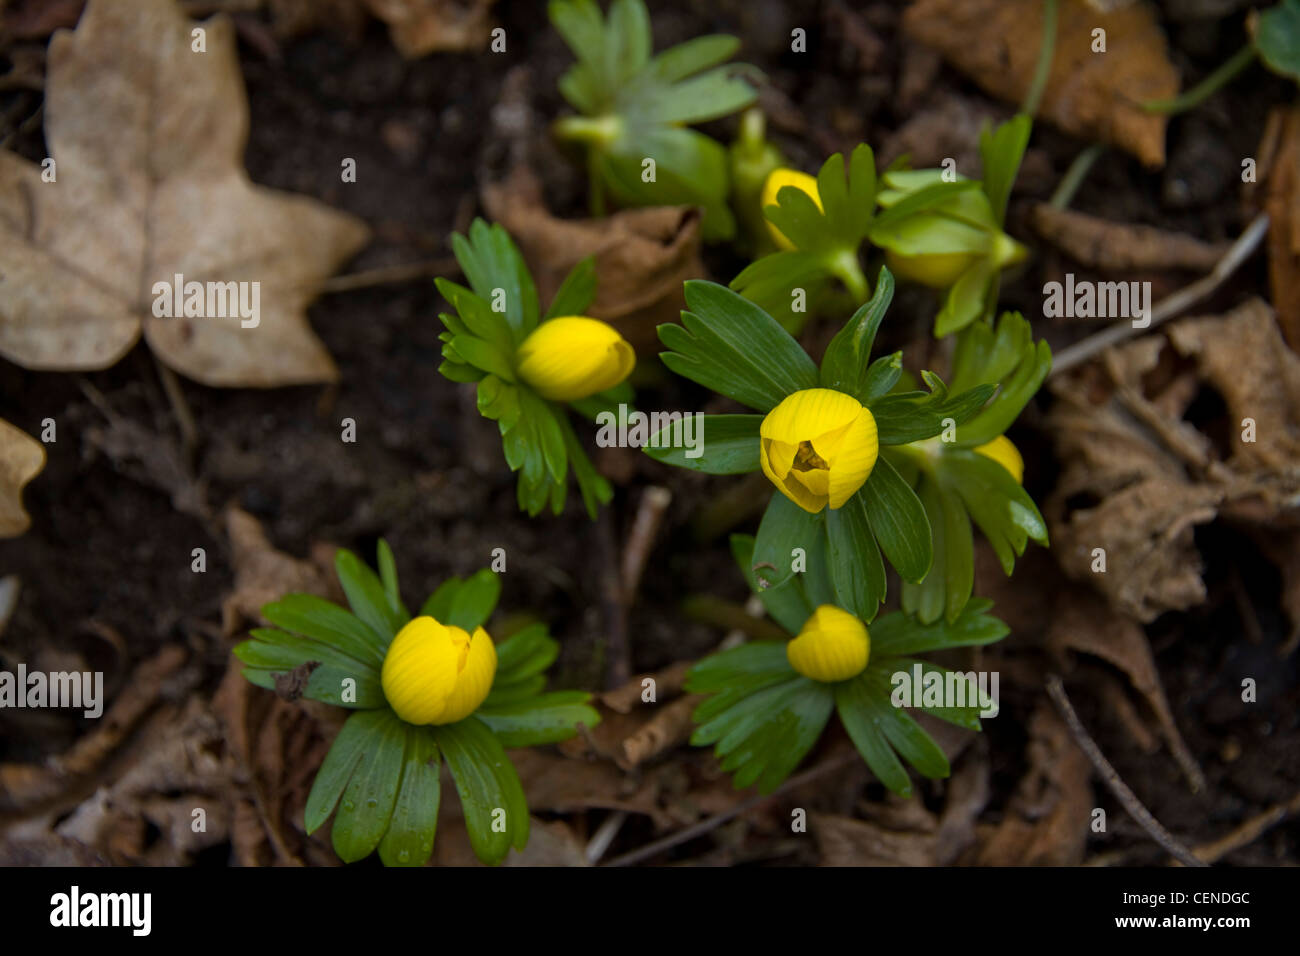 Bright yellow winter aconites (Eranthis) flowering on a mossy leaf-strewn woodland floor Stock Photo